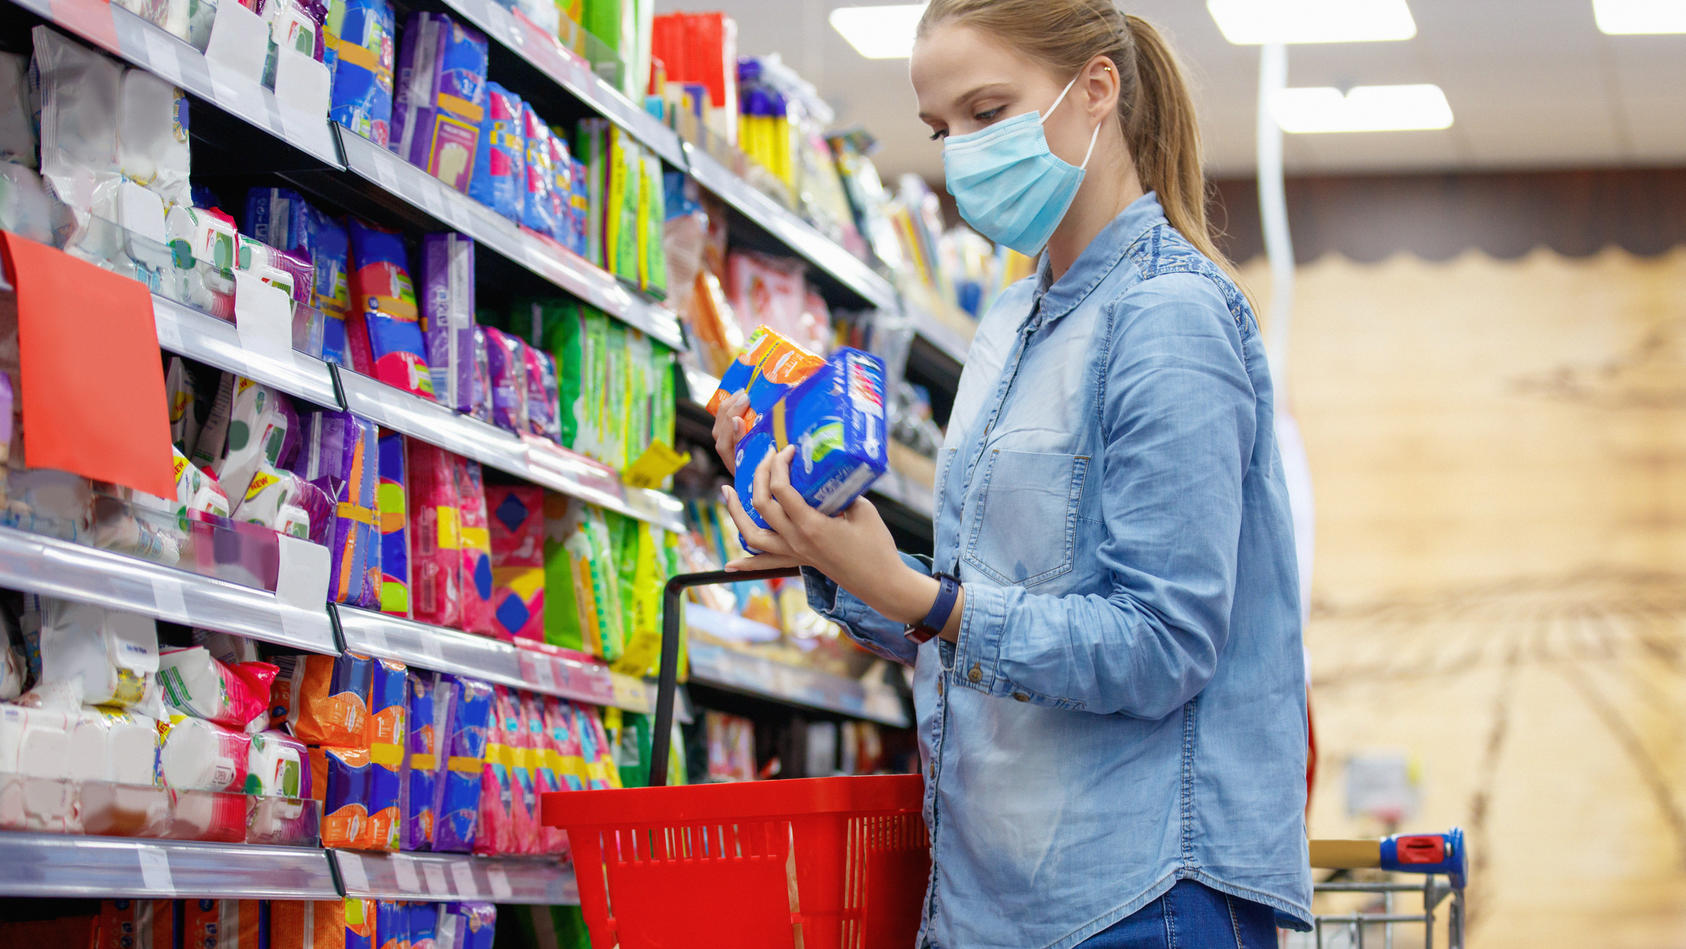 Young woman wearing protective face mask, choosing sanitary pads in supermarket aisle, COVID-19 pandemic era (Young woman wearing protective face mask, choosing sanitary pads in supermarket aisle, COVID-19 pandemic era, ASCII, 109 components, 109 byt